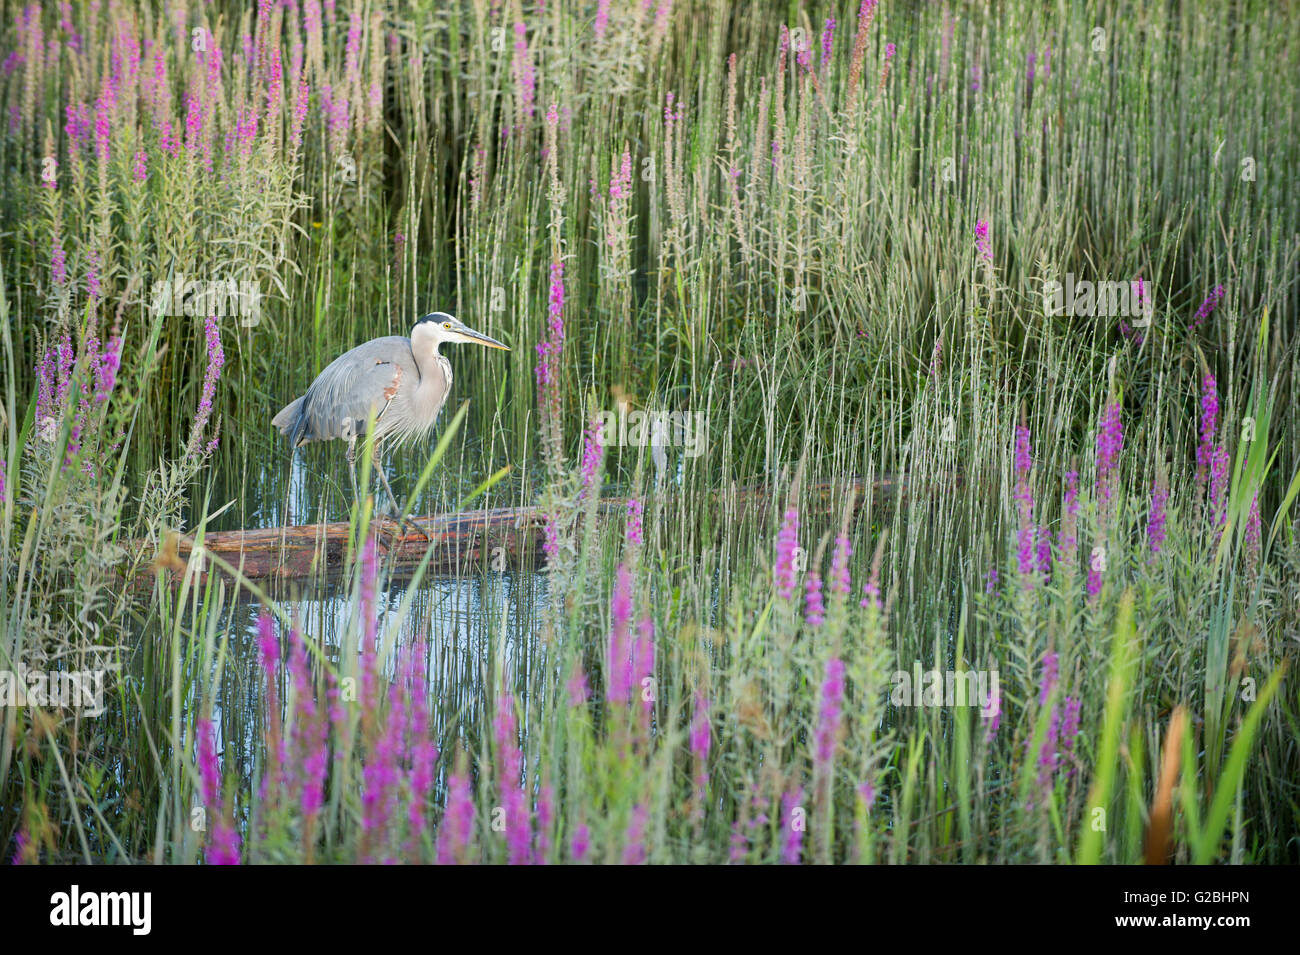 Great Blue Heron standing on a log in a estuary. Stock Photo